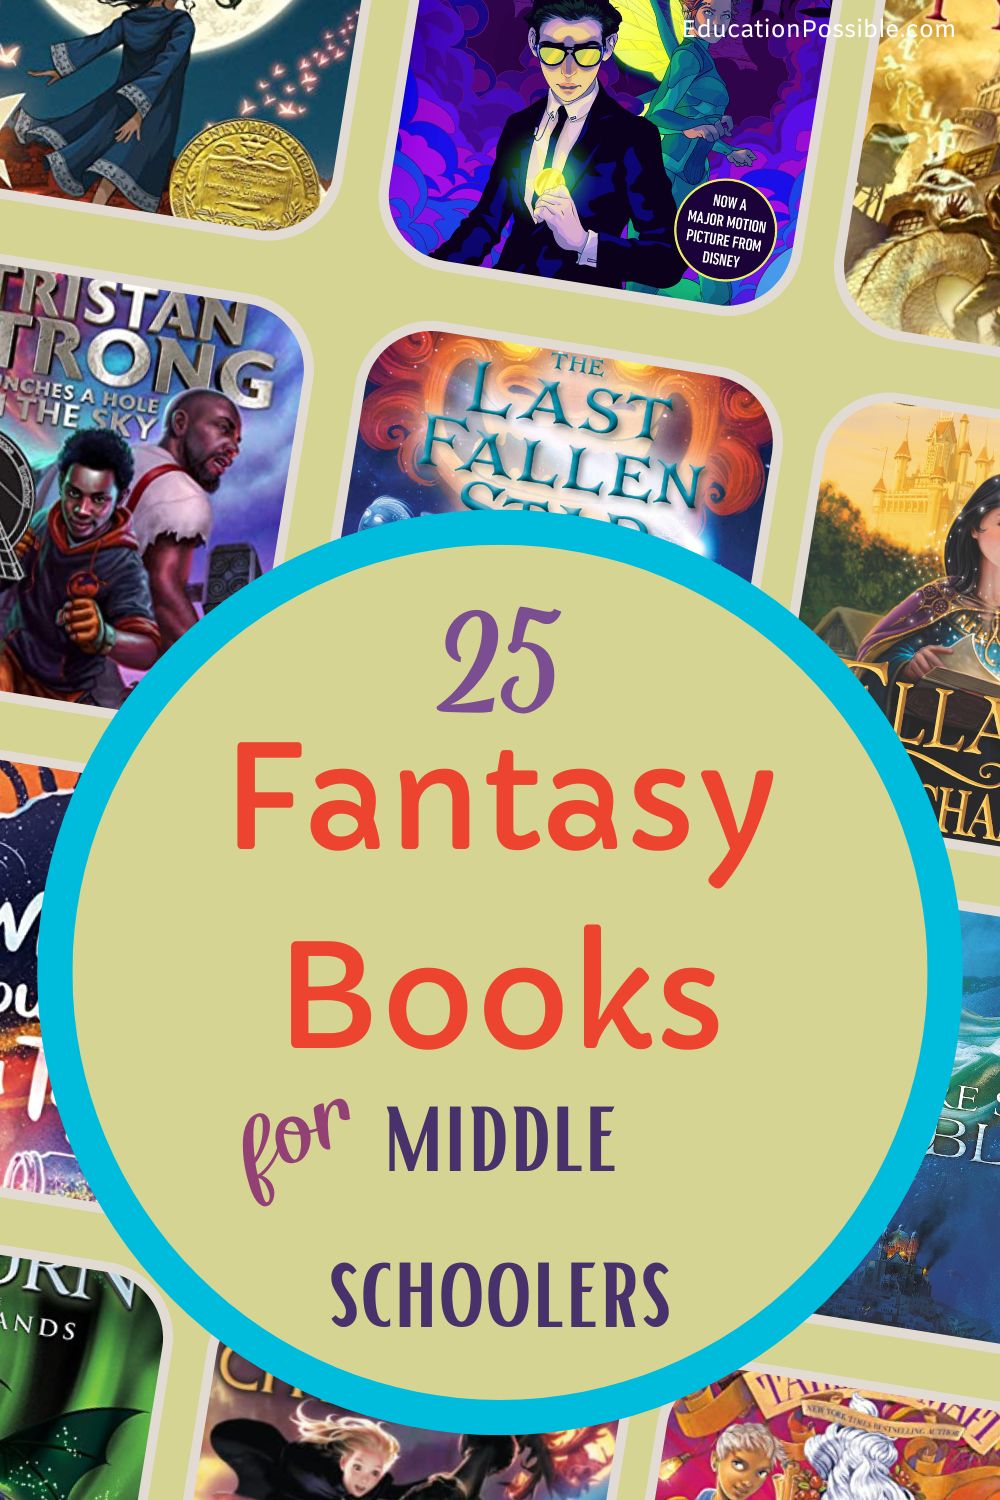 Collage of middle grade fantasy book covers. Middle school book list.